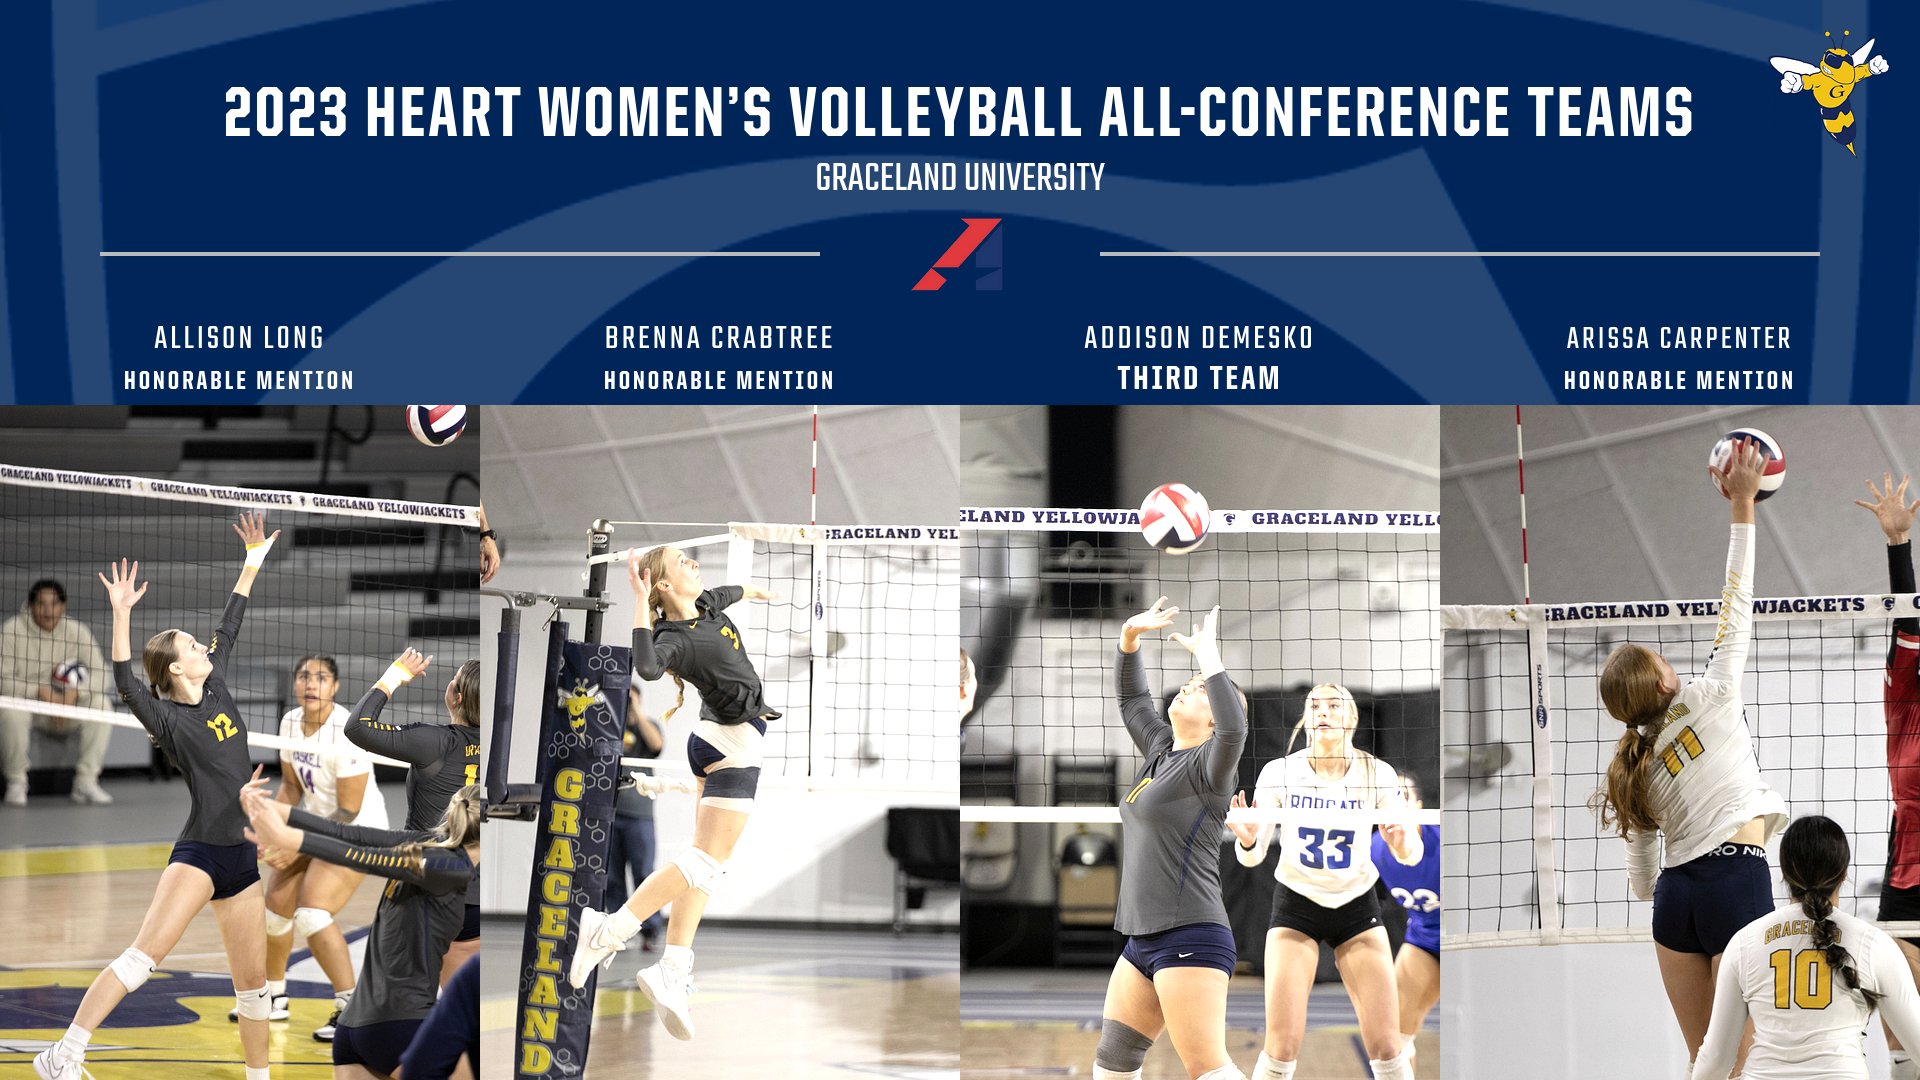 Four Named to the 2023 Heart Women’s Volleyball All-Conference Teams